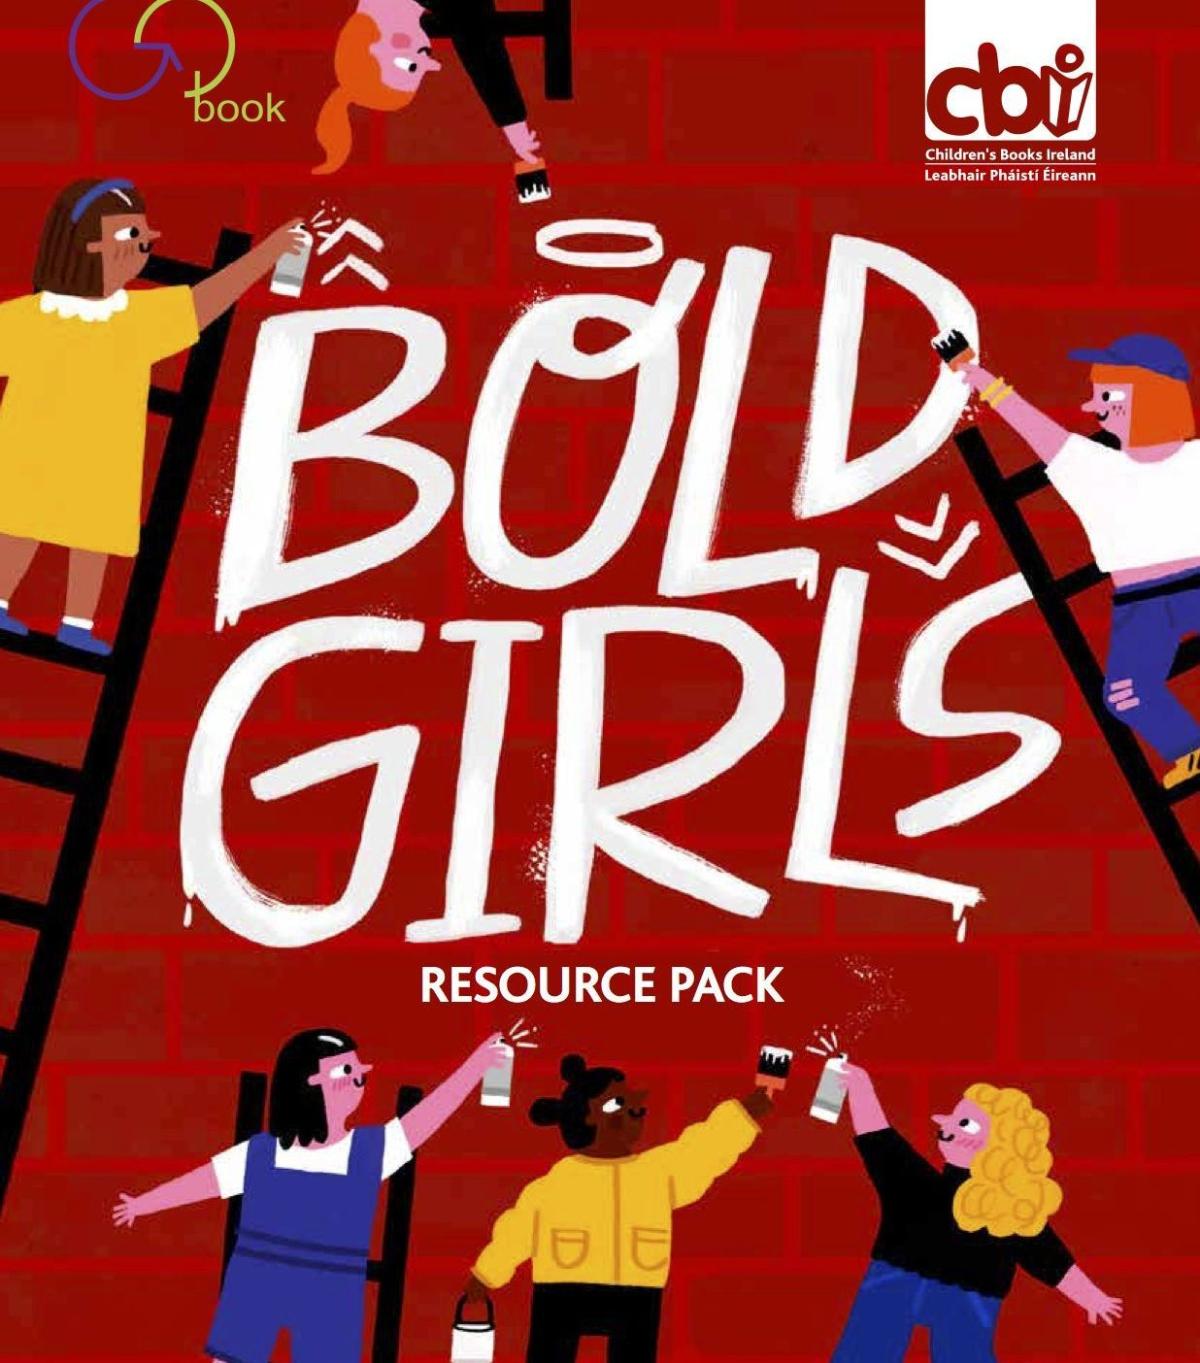 Dublin City University is delighted to be partnering Children’s Books Ireland on its BOLD GIRLS Project